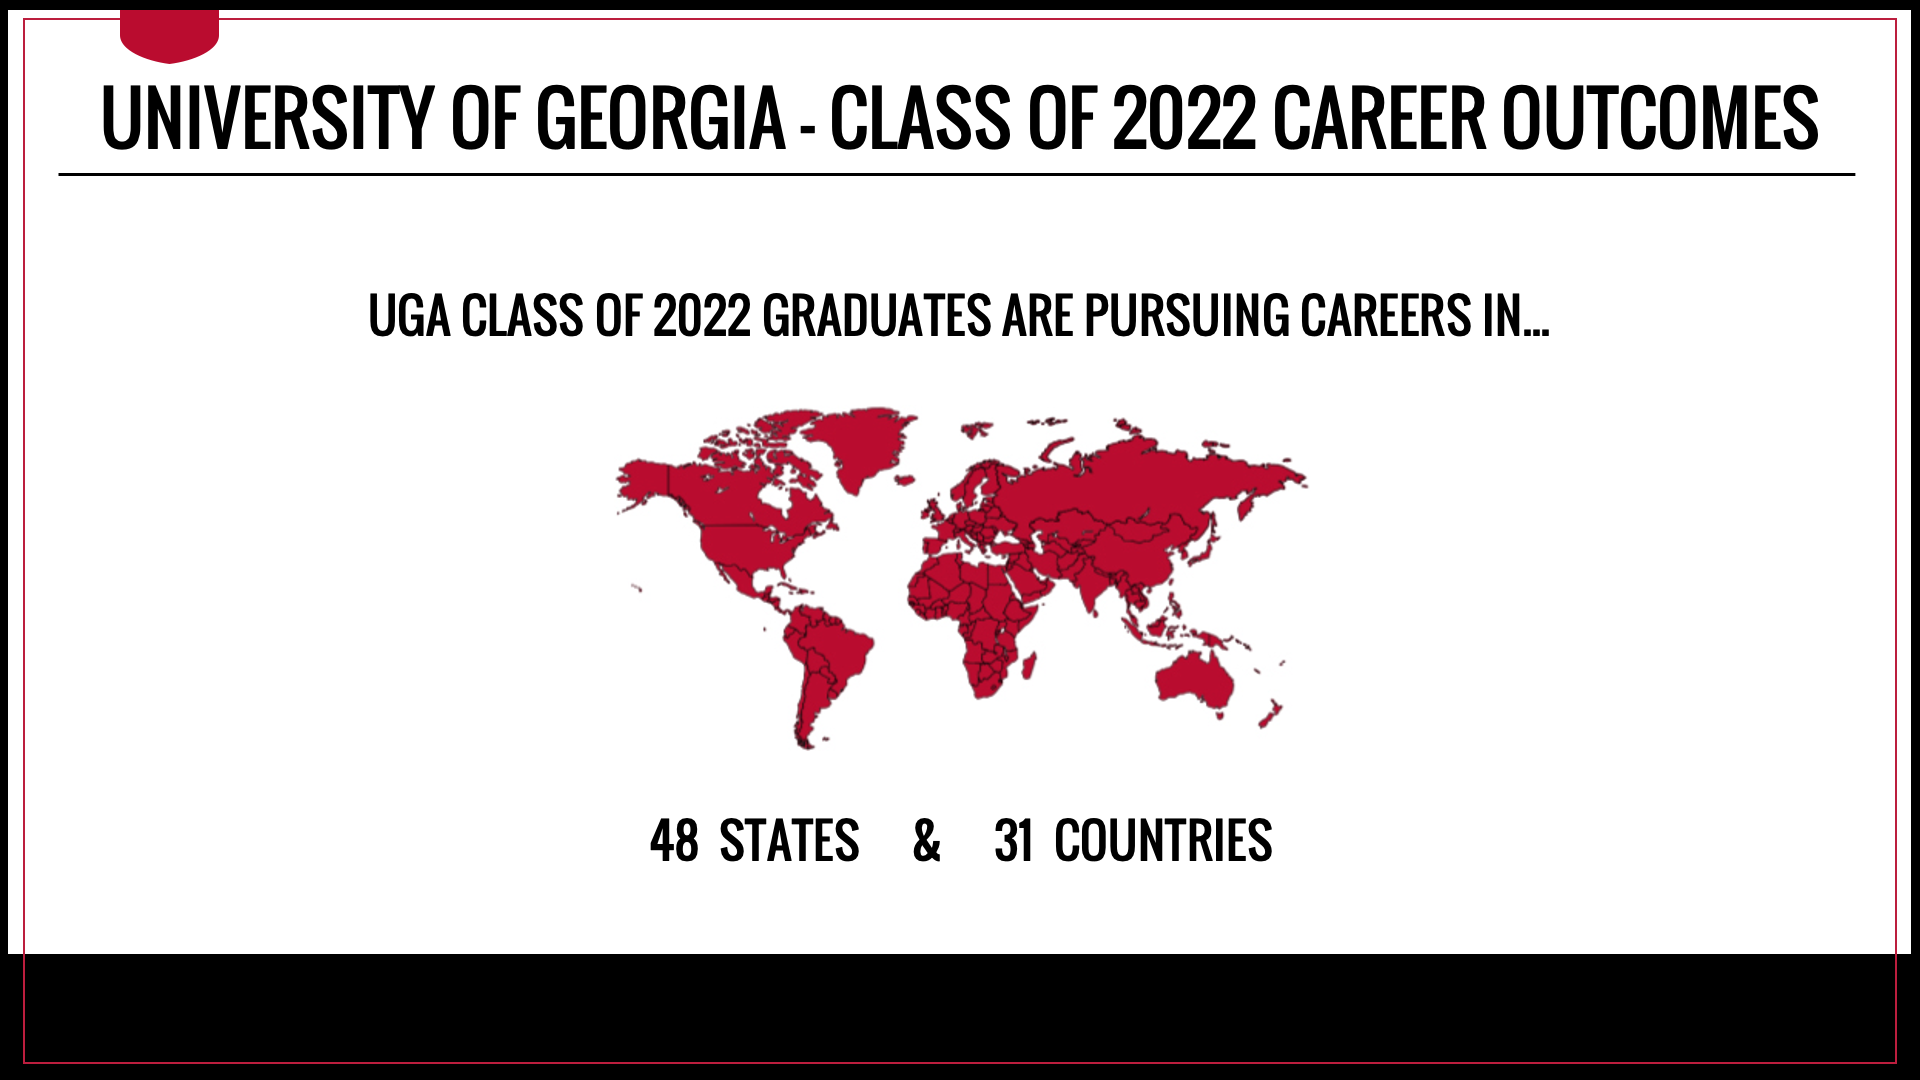 UGA CLASS OF 2022 GRADUATES ARE PURSUING CAREERS IN 48 STATES AND 31 COUNTRIES